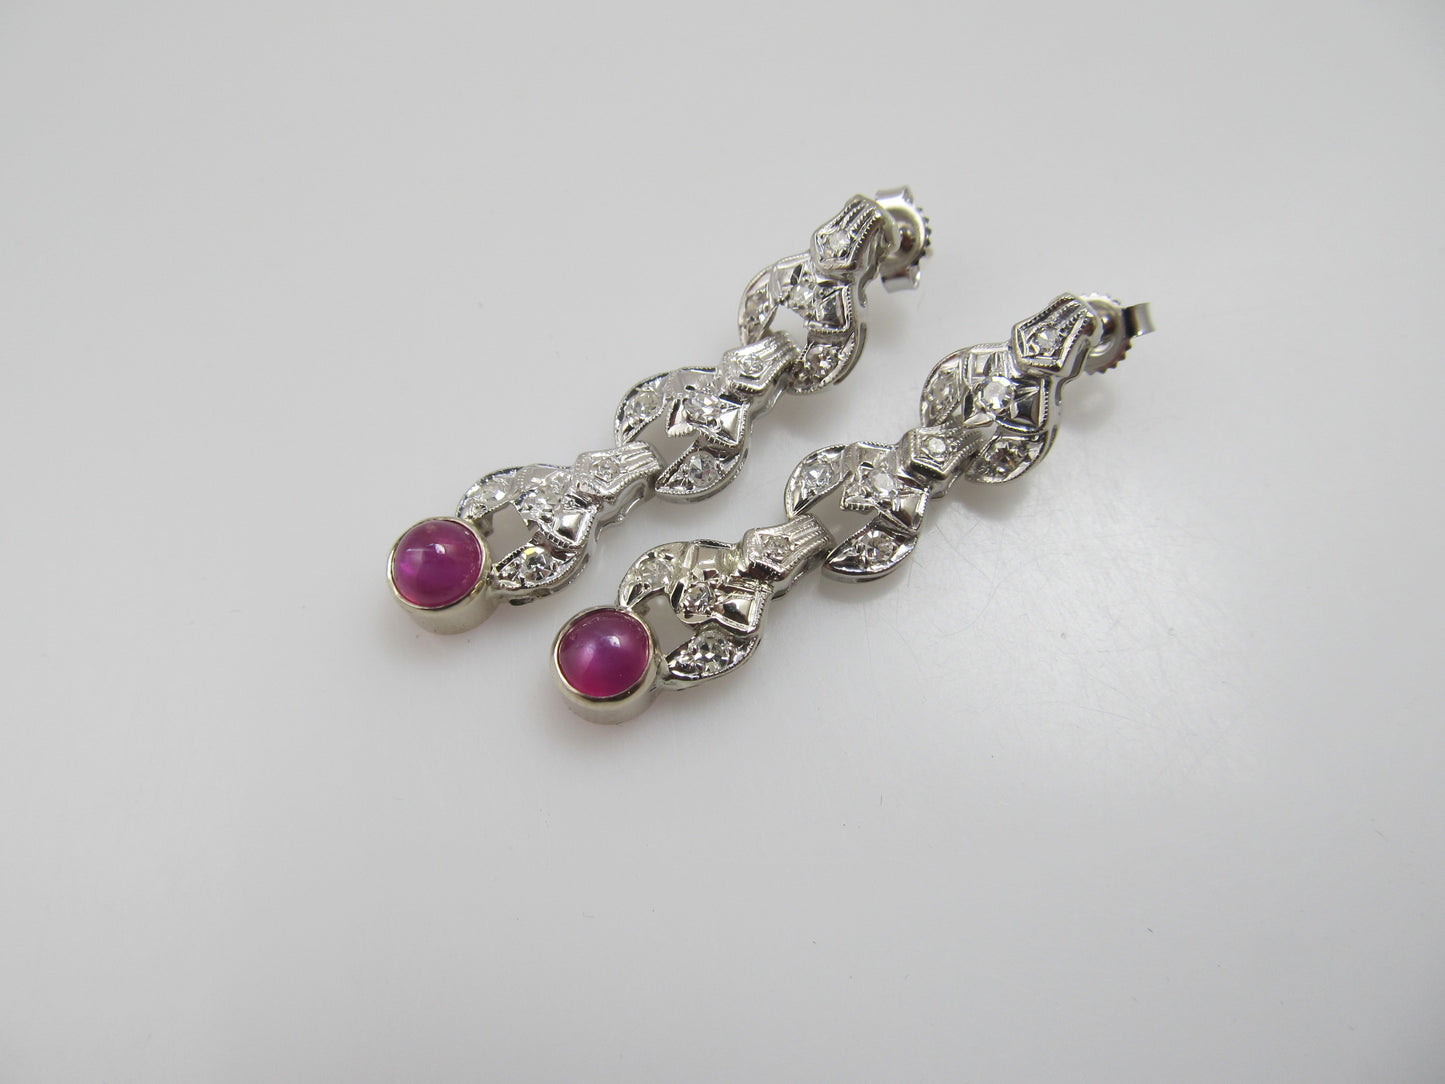 Vintage platinum drop earrings with diamonds and star ruby